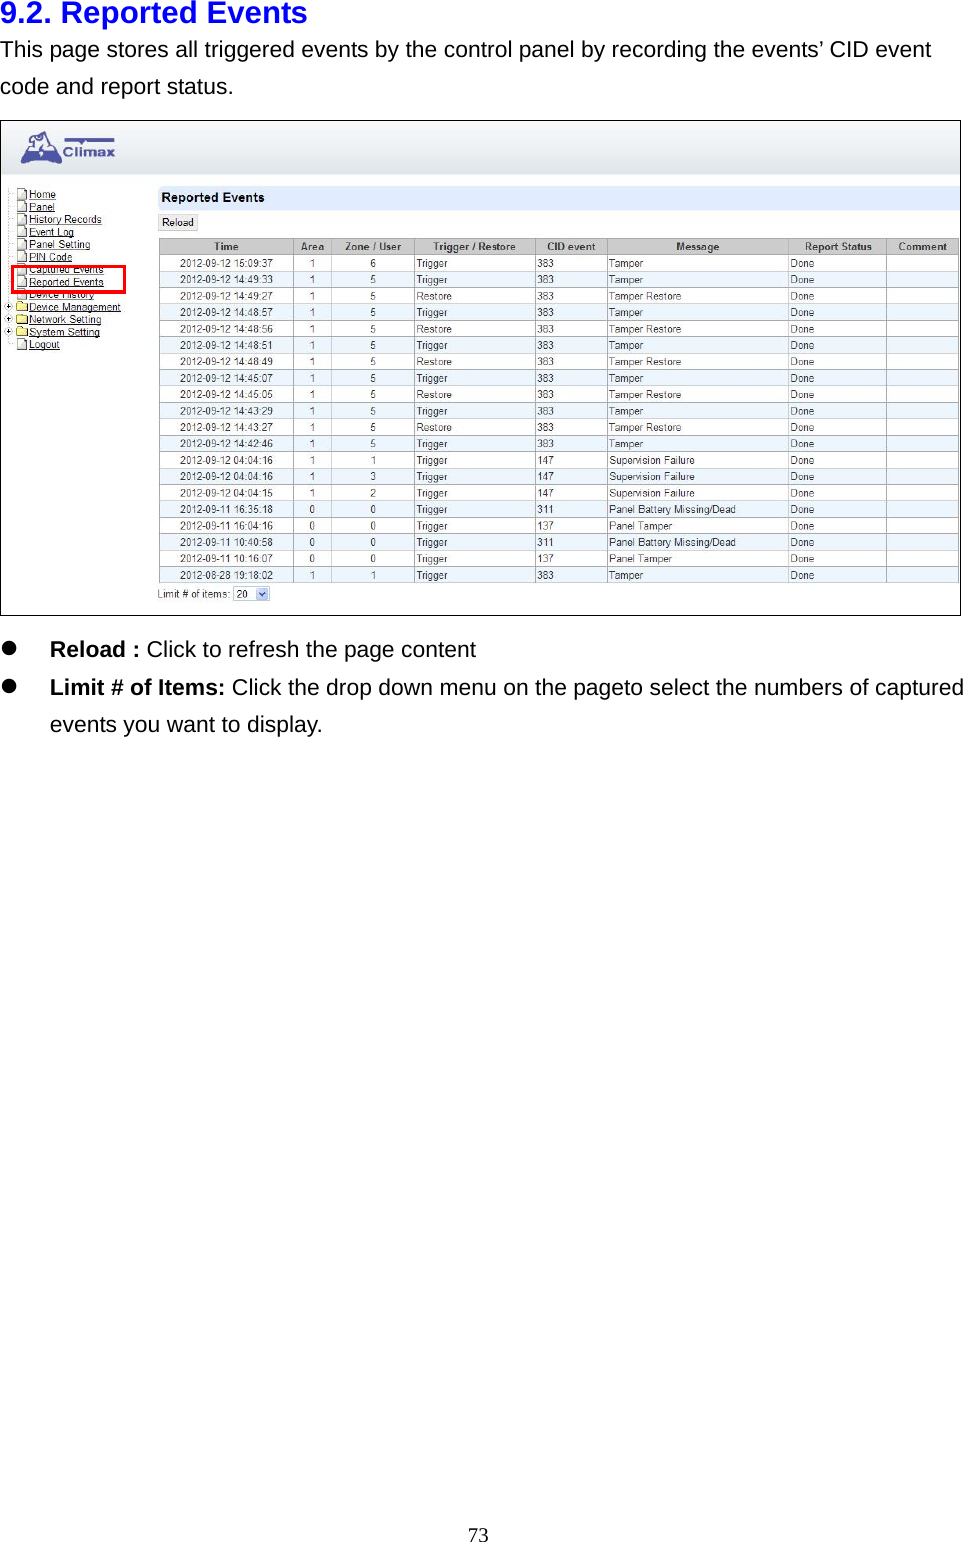  739.2. Reported Events     This page stores all triggered events by the control panel by recording the events’ CID event code and report status.   Reload : Click to refresh the page content      Limit # of Items: Click the drop down menu on the pageto select the numbers of captured events you want to display.                         